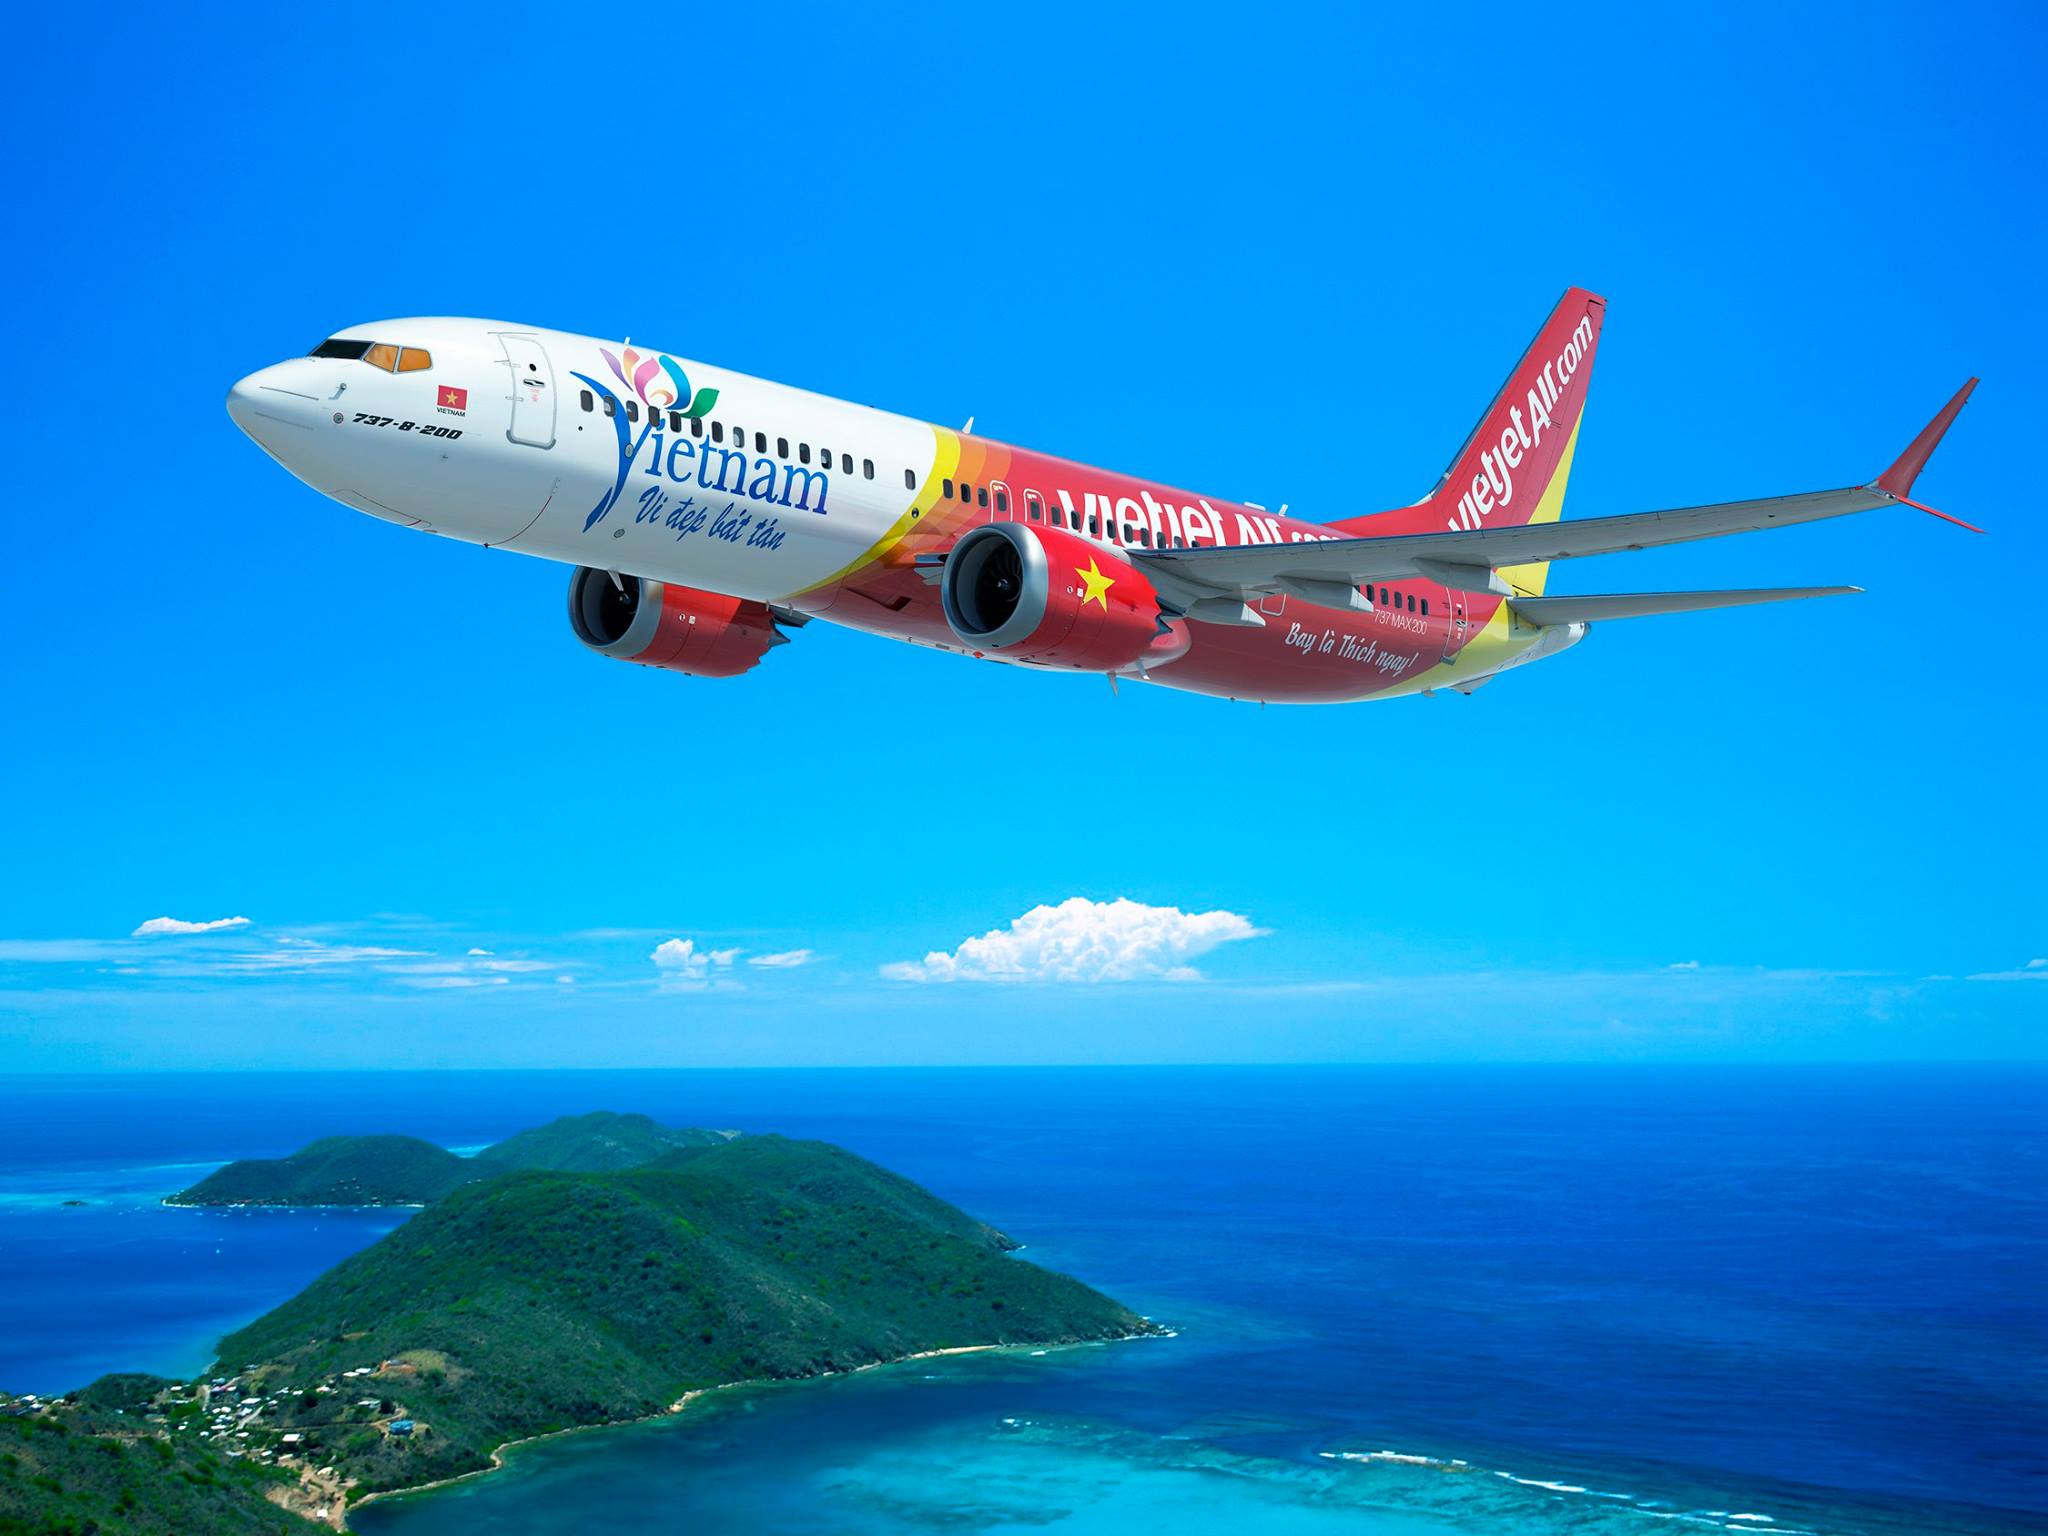 Looking back / looking forward & well done to VietJet